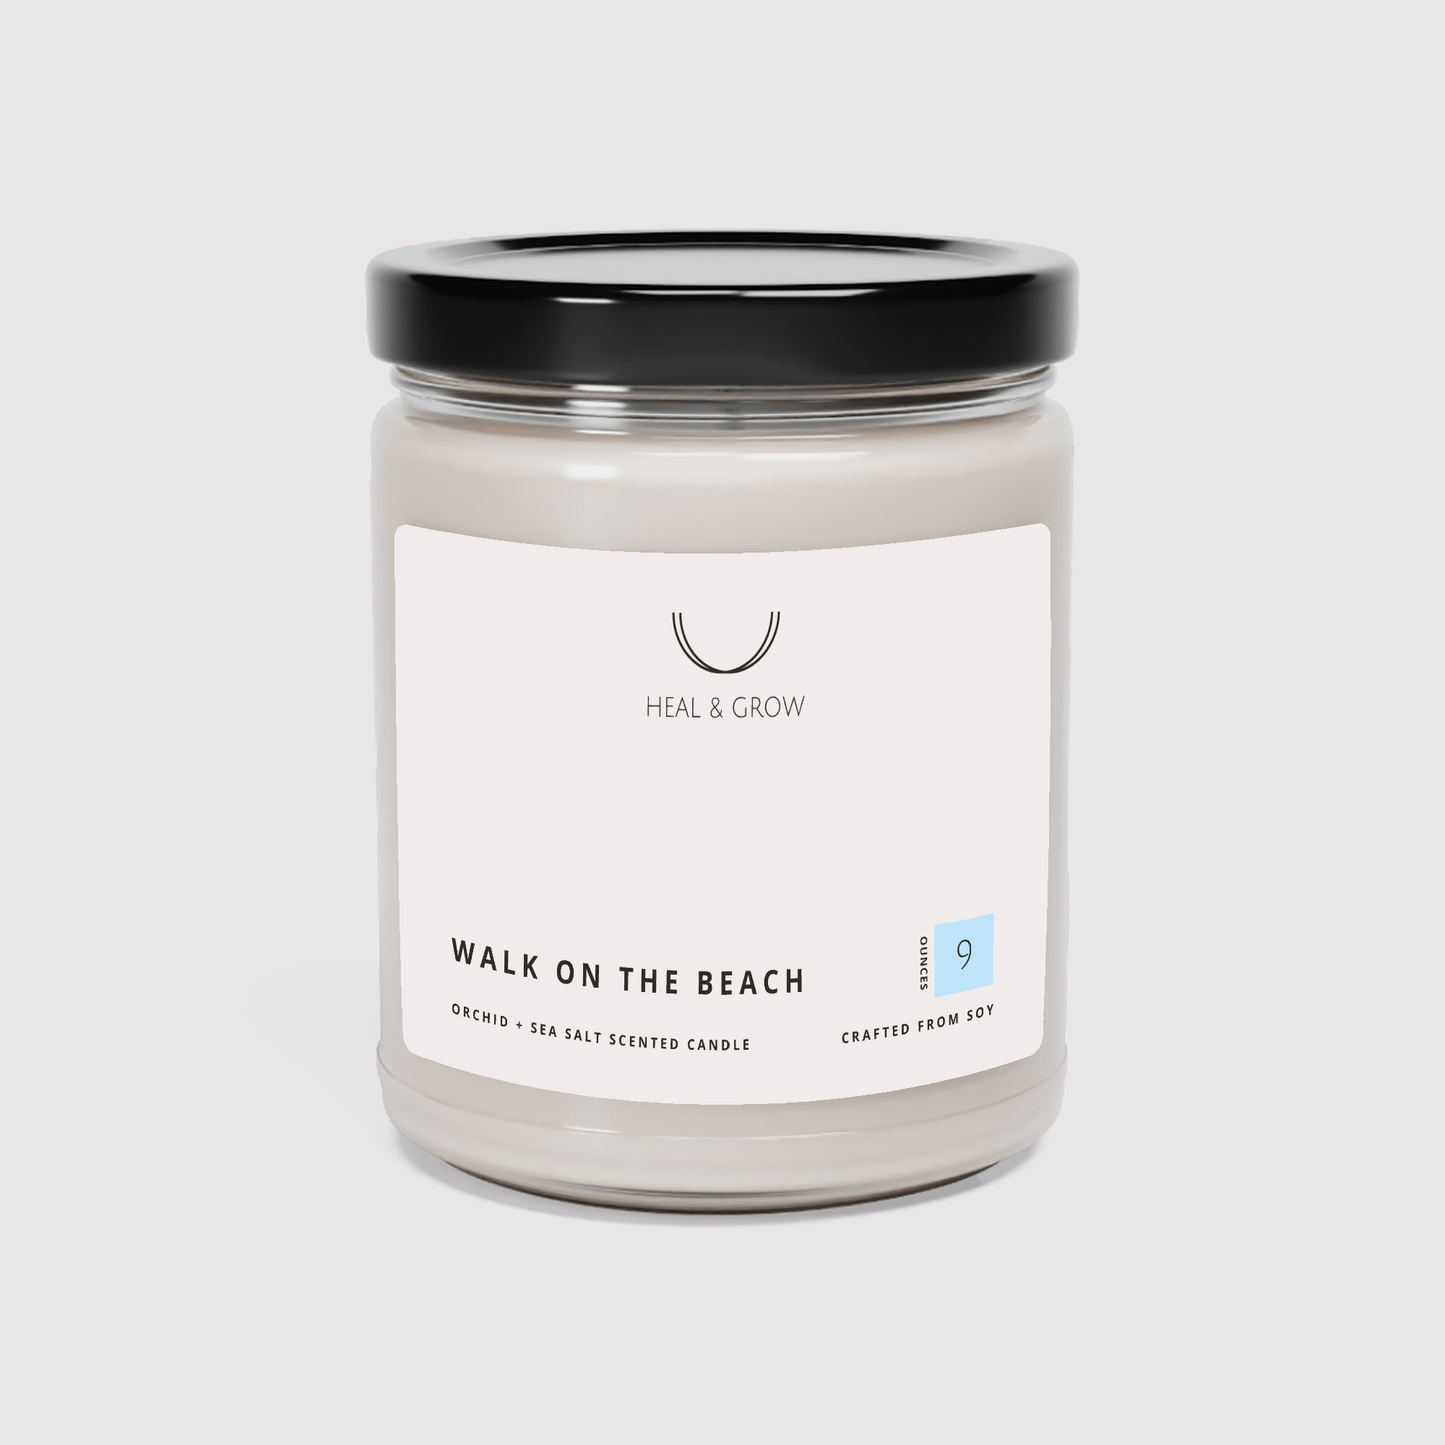 Walk on the Beach Scented Candle (9oz)